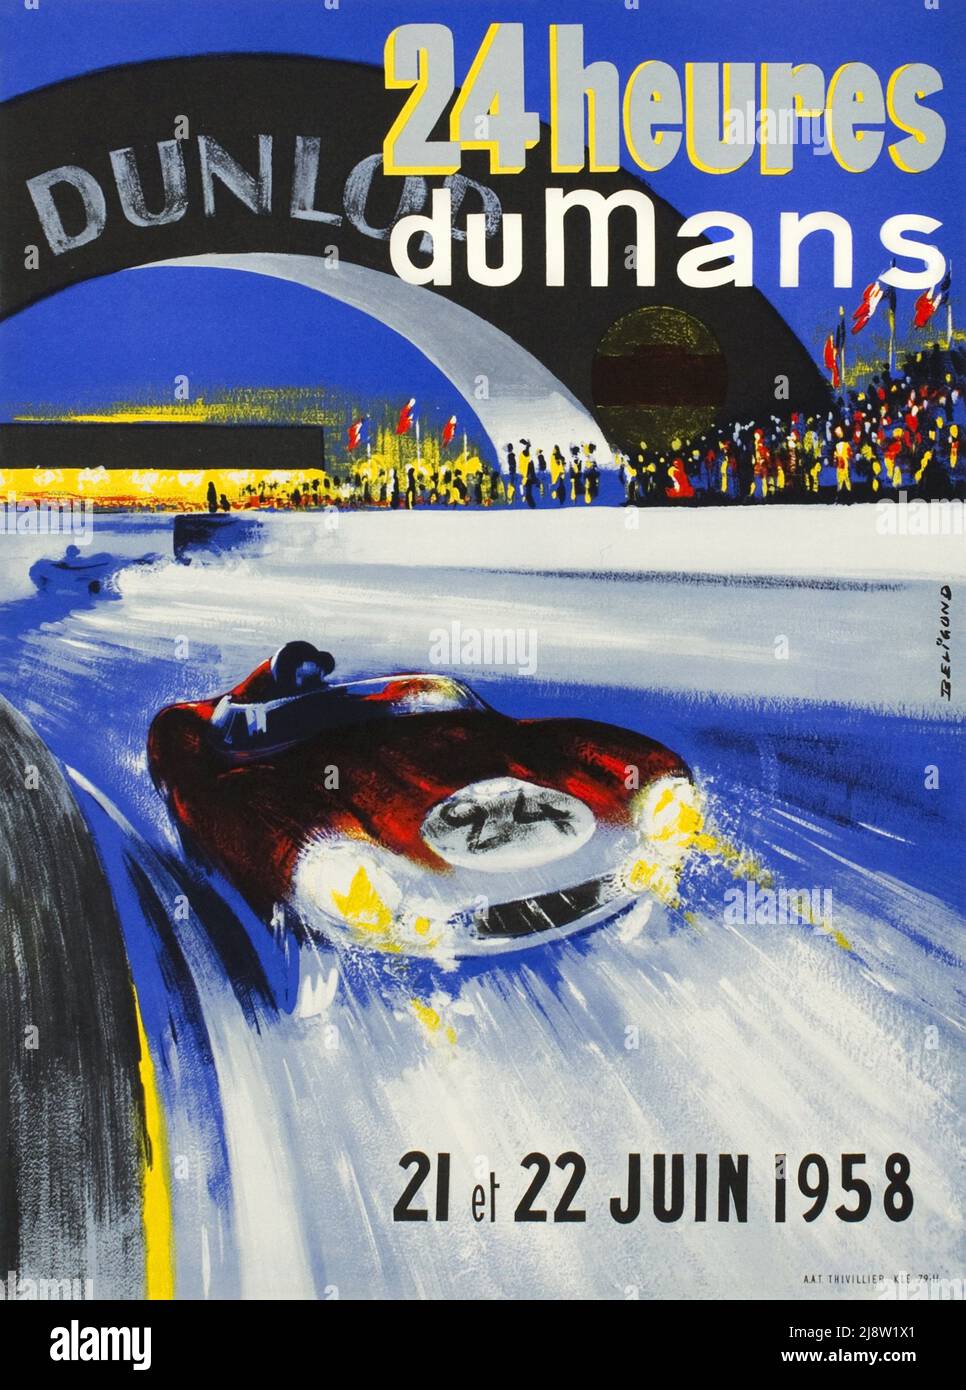 Vintage 1950s Race Poster - 24 Hours of Le Mans -1958 Stock Photo